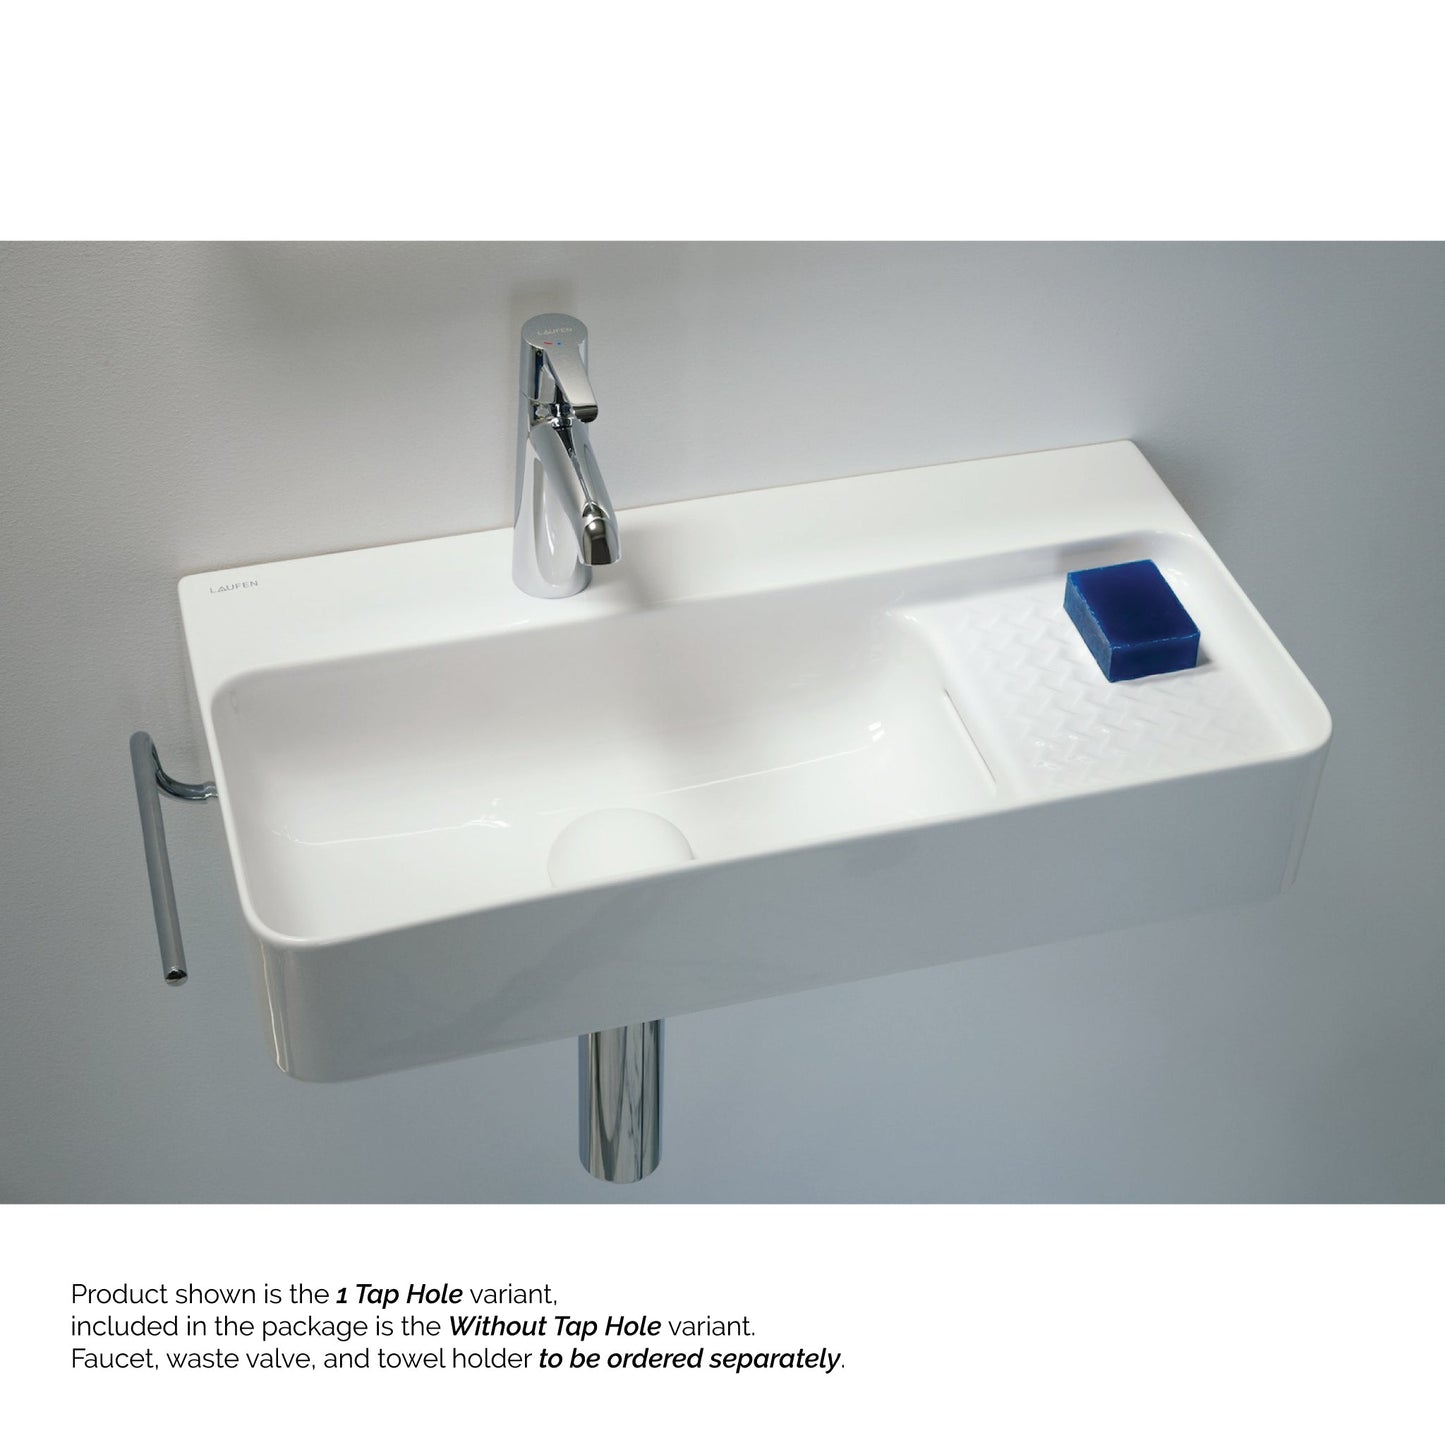 Laufen Val 24" x 12" Rectangular Matte White Wall-Mounted Bathroom Sink Without Faucet Hole